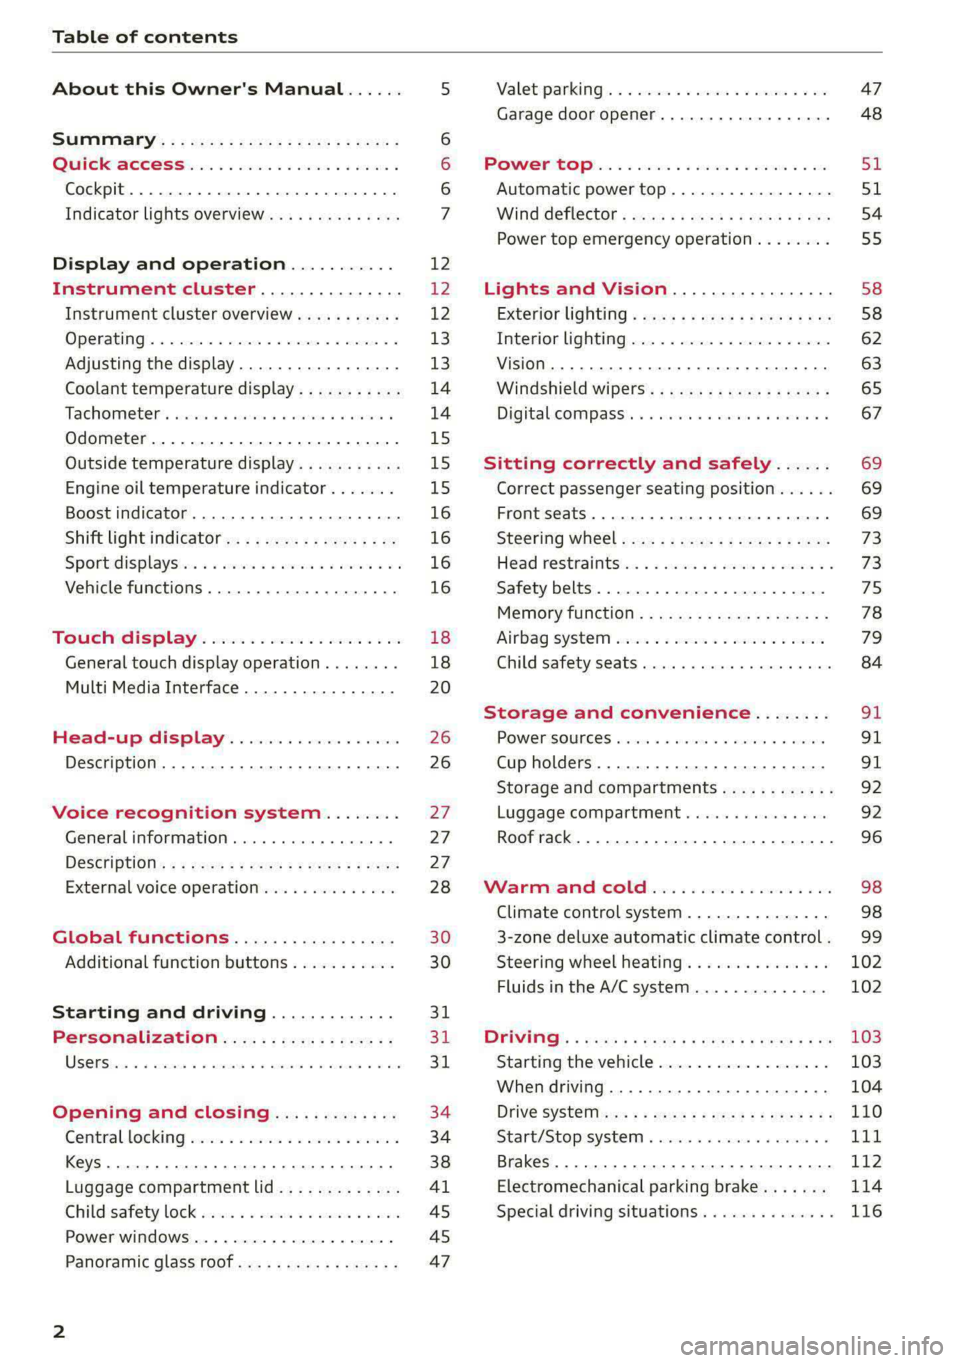 AUDI A5 2021  Owners Manual Table of contents 
  
About this Owner's Manual...... 
SUMIMAry: < = exe : eens: Seen cs sens 
QutckeaeCe ssh: «i esis se ois a eaves @ 
Cockpit. ...... 0... eee eee eee  eee 
Indicator lights ov